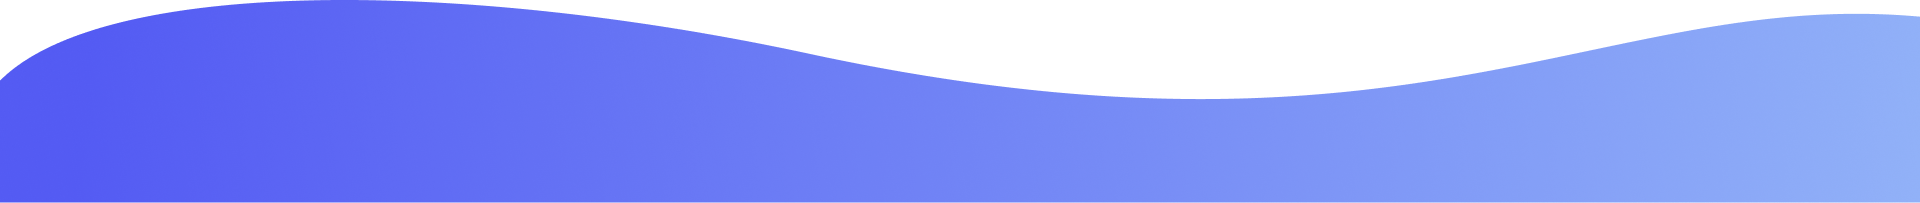 Dark and light blue gradient with the form of a wave.